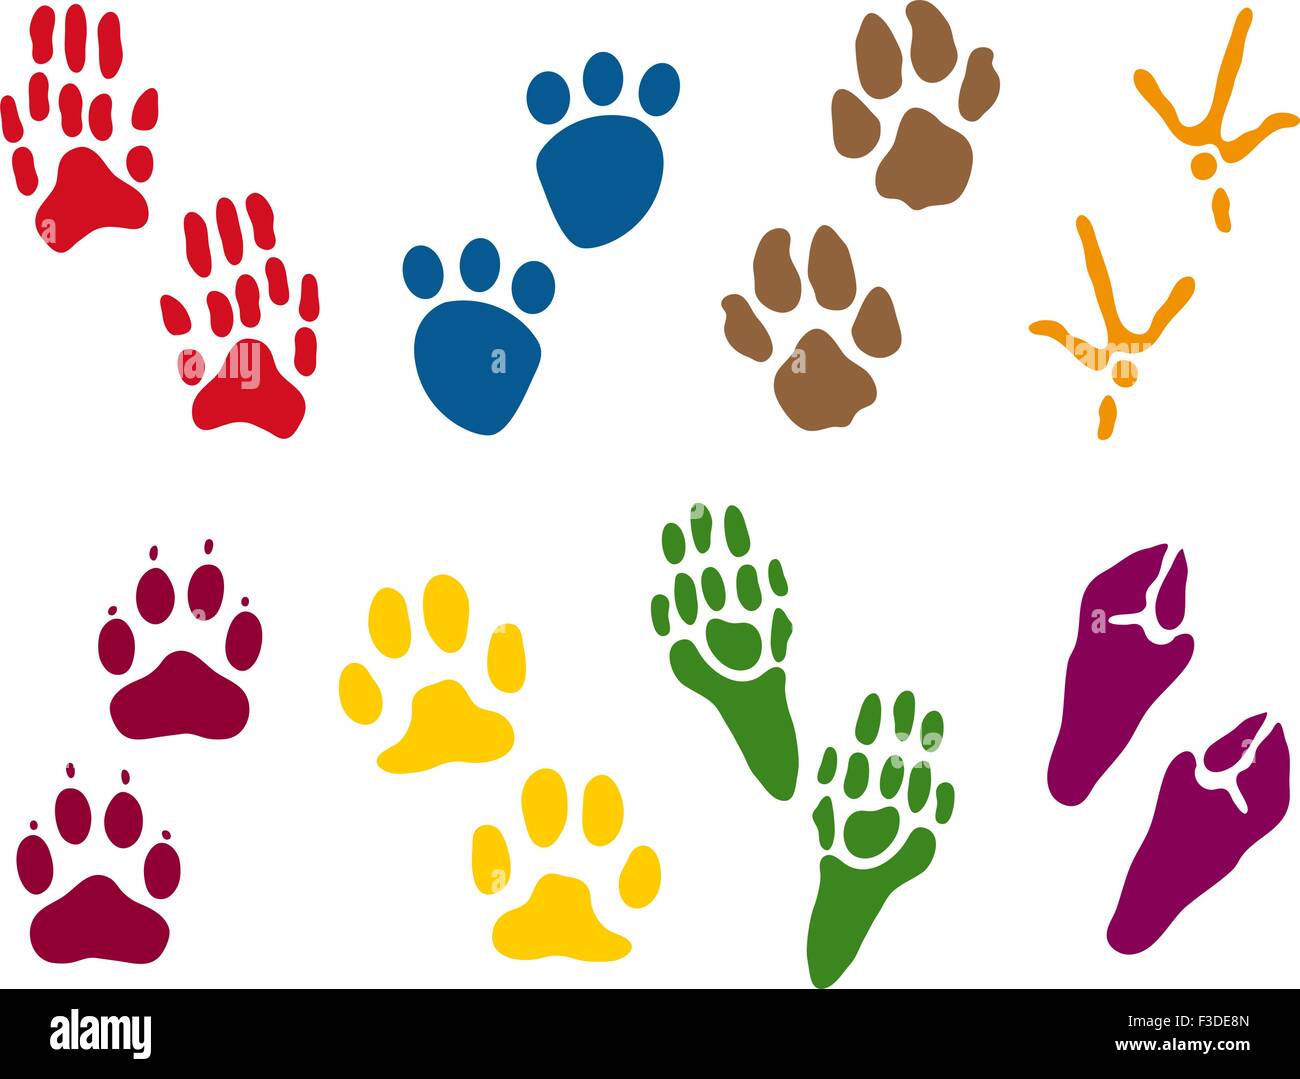 Eight sets of Animal Tracks SS 1538686 SS 3505299 jpg IS 1887991 Stock Vector